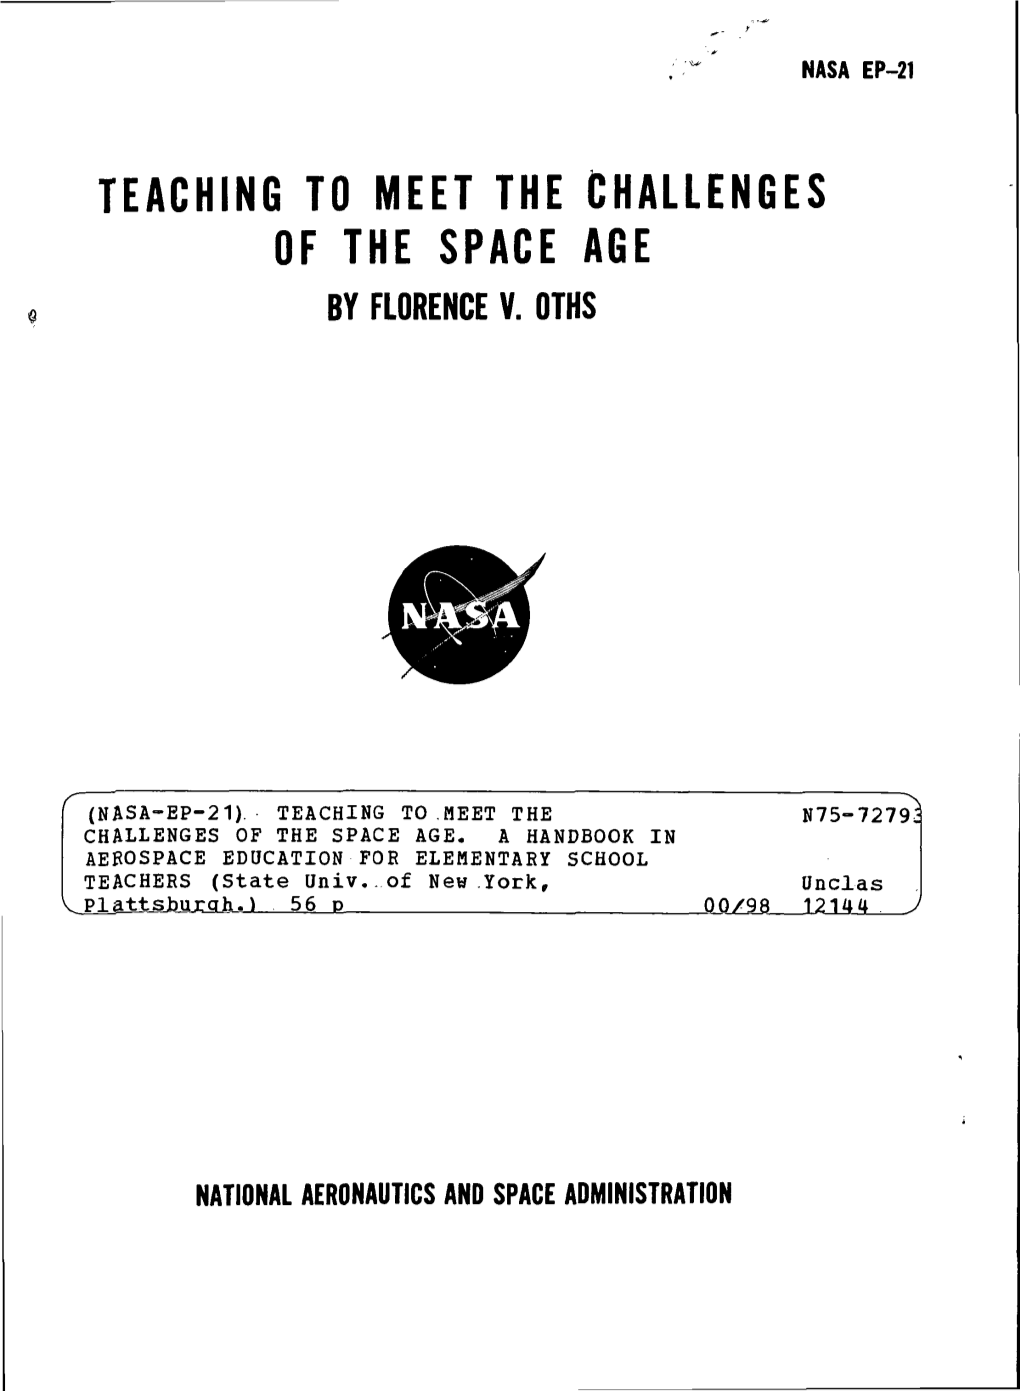 Teaching to Meet the Challenges of the Space Age by Florence V